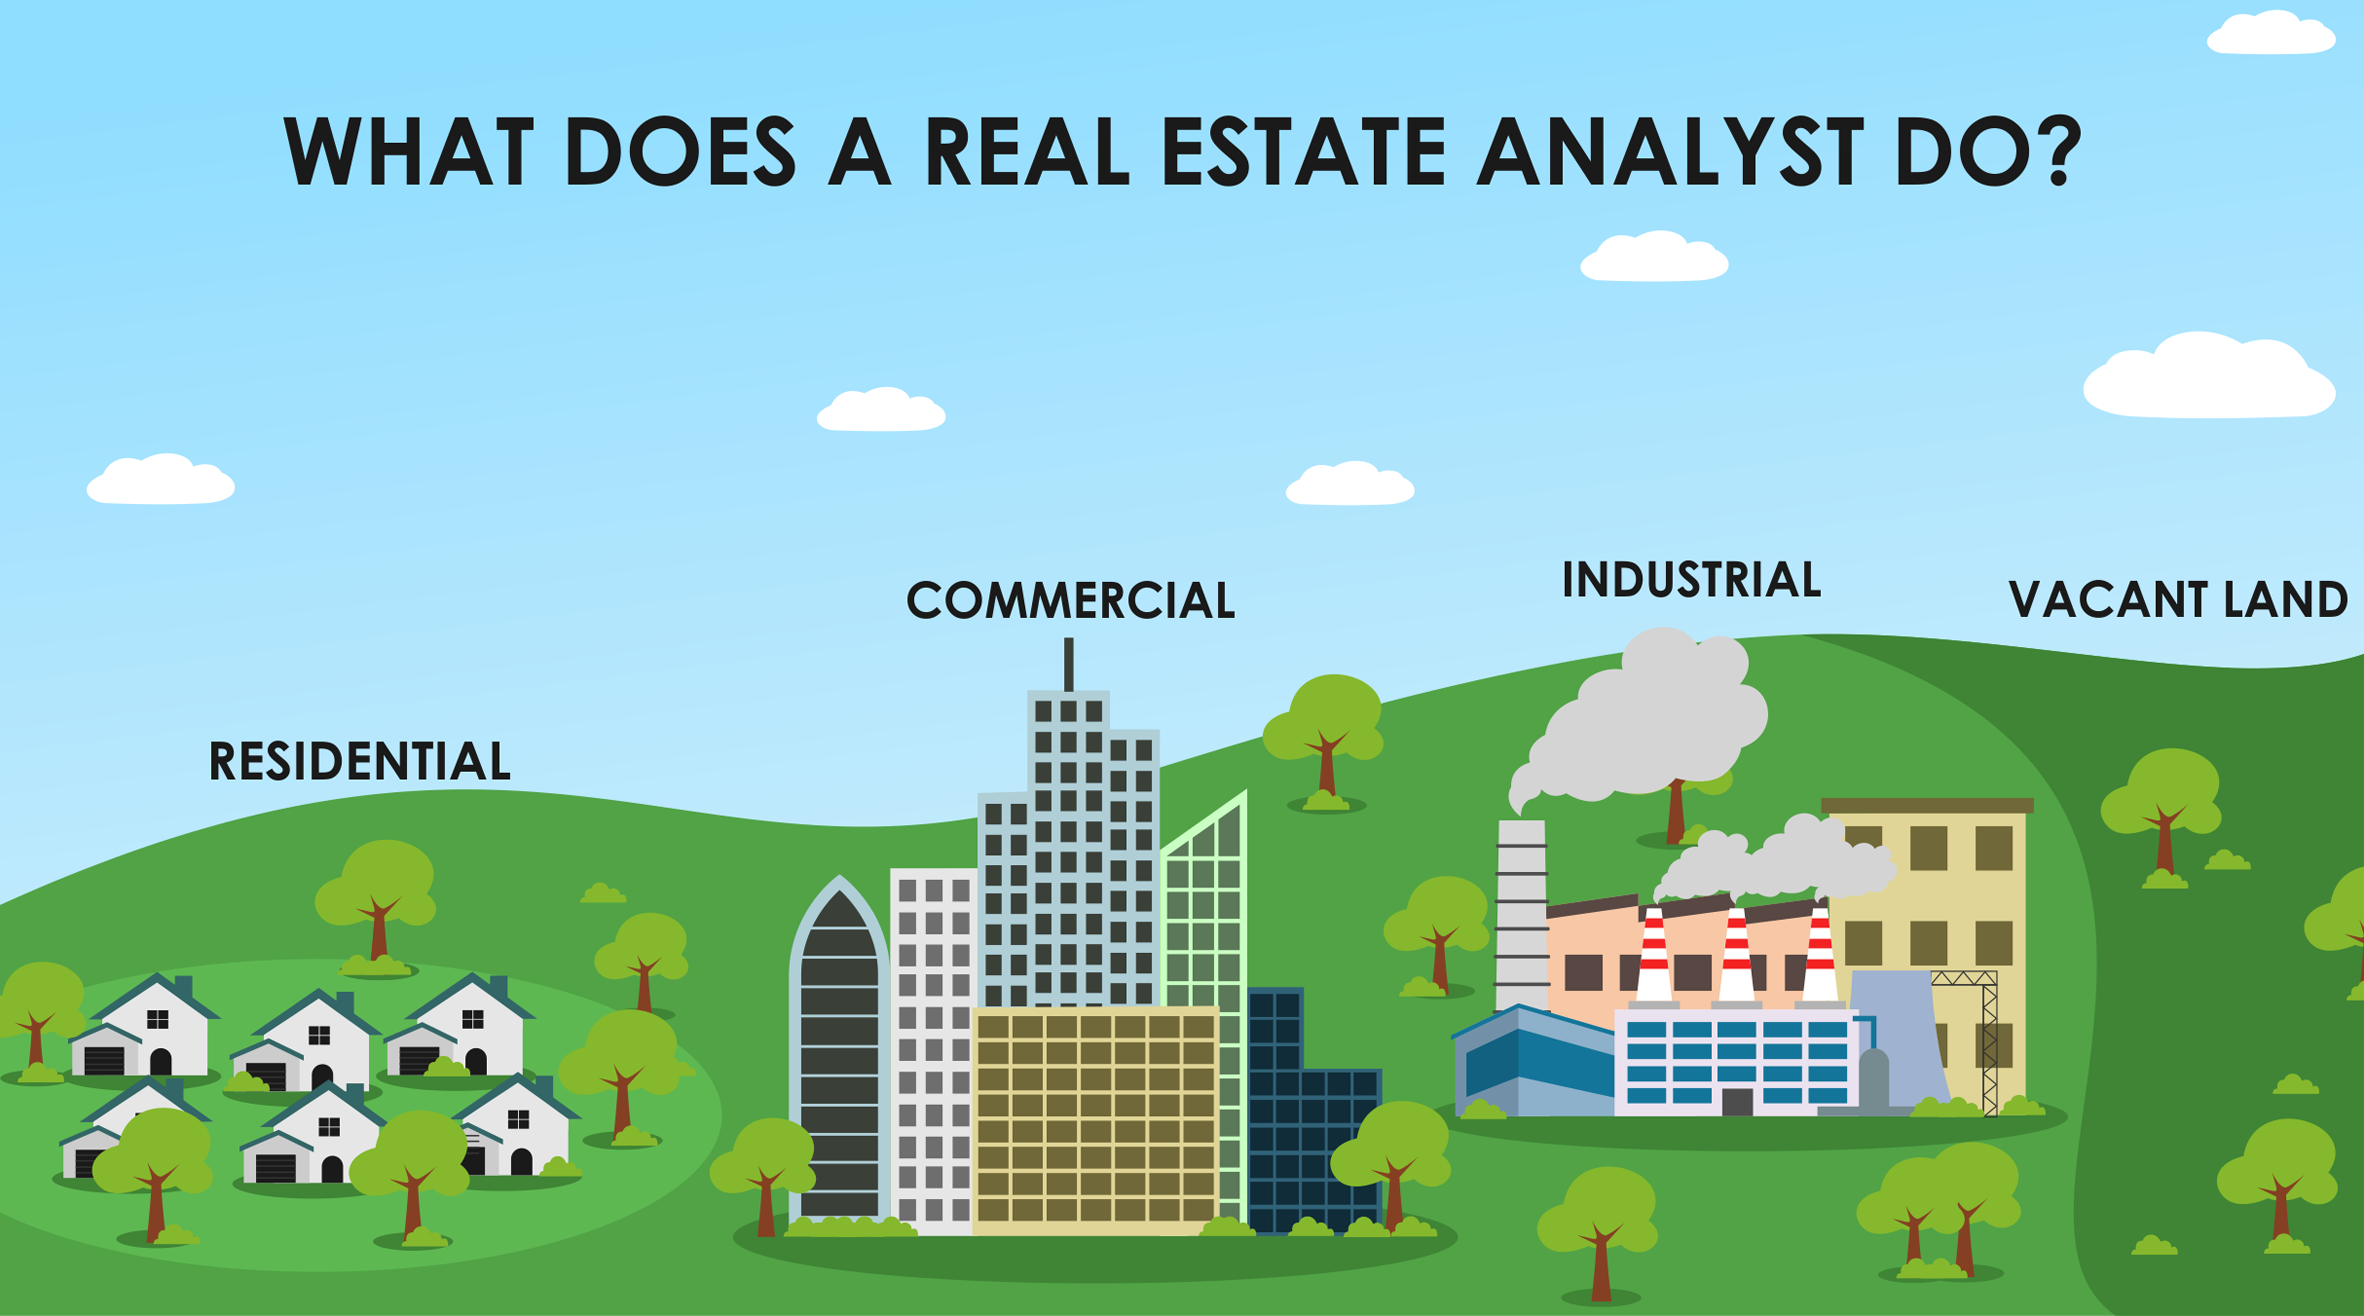 What does a real estate analyst do